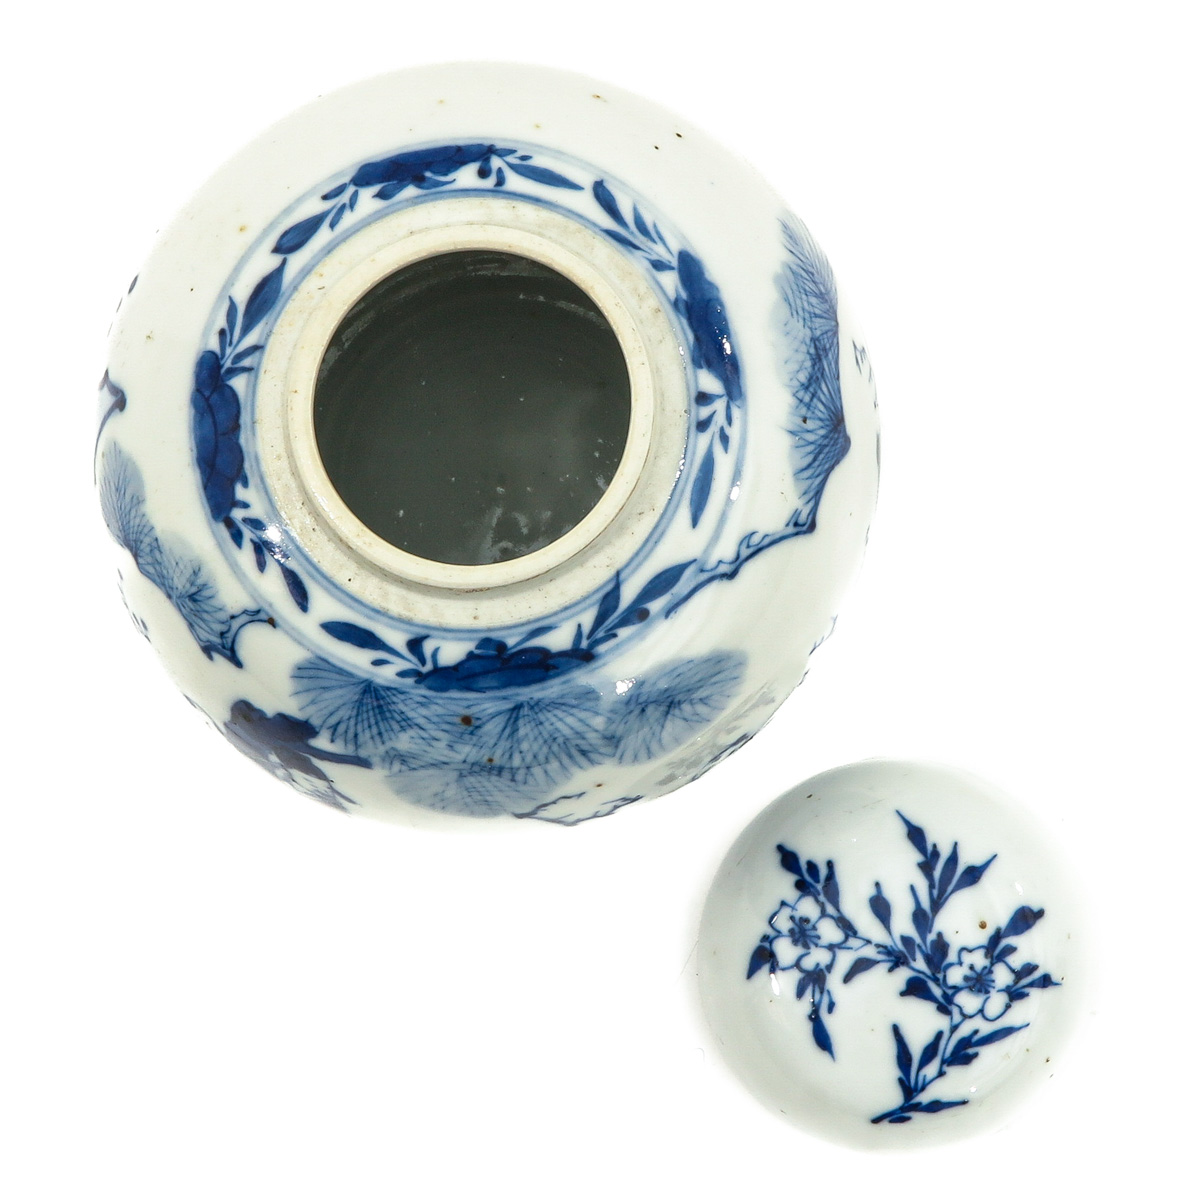 A Blue and White Ginger Jar - Image 5 of 9